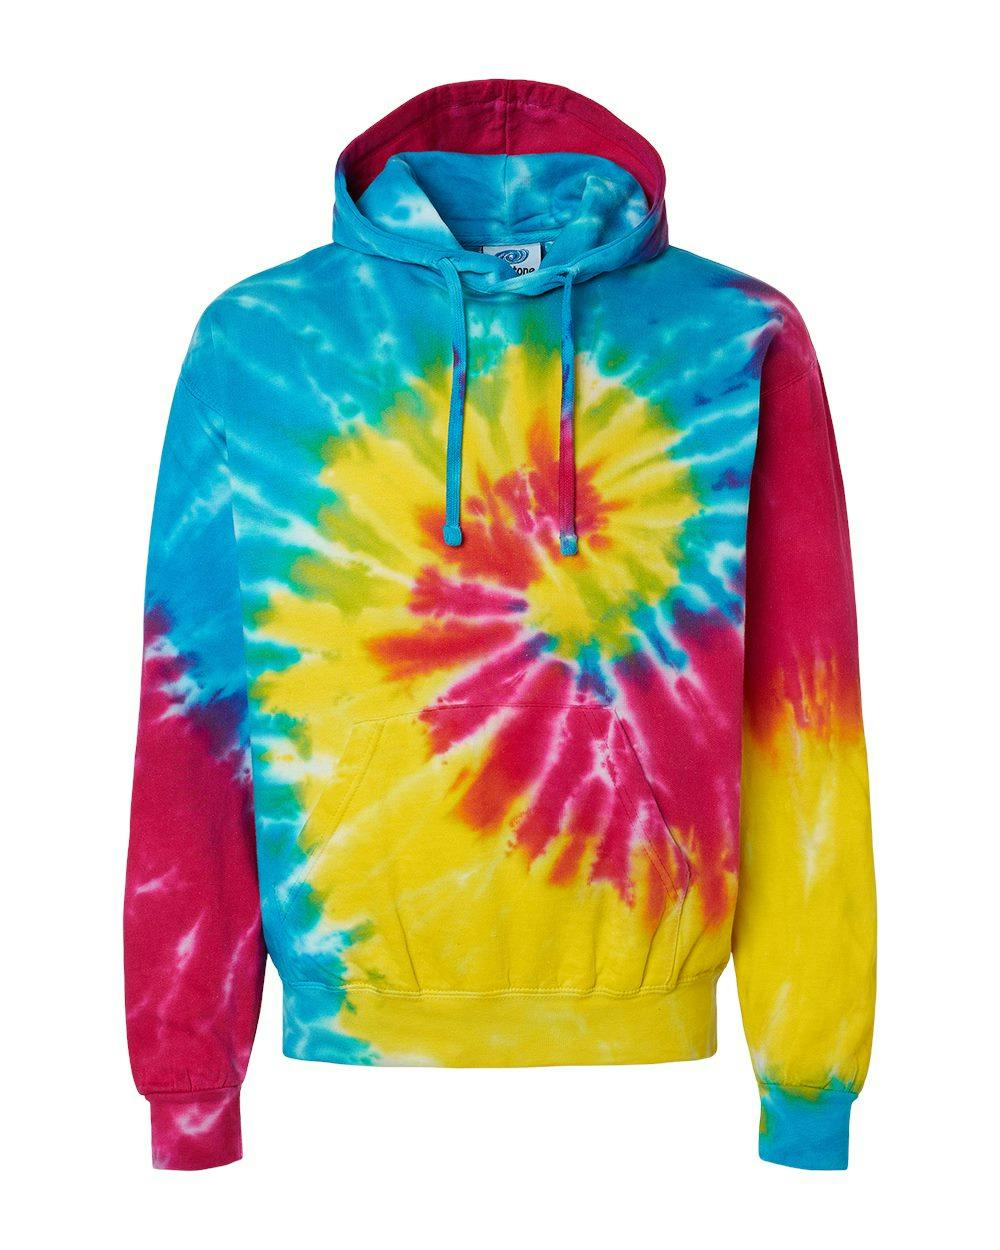 Image for Youth Tie-Dyed Hooded Sweatshirt - 8777Y